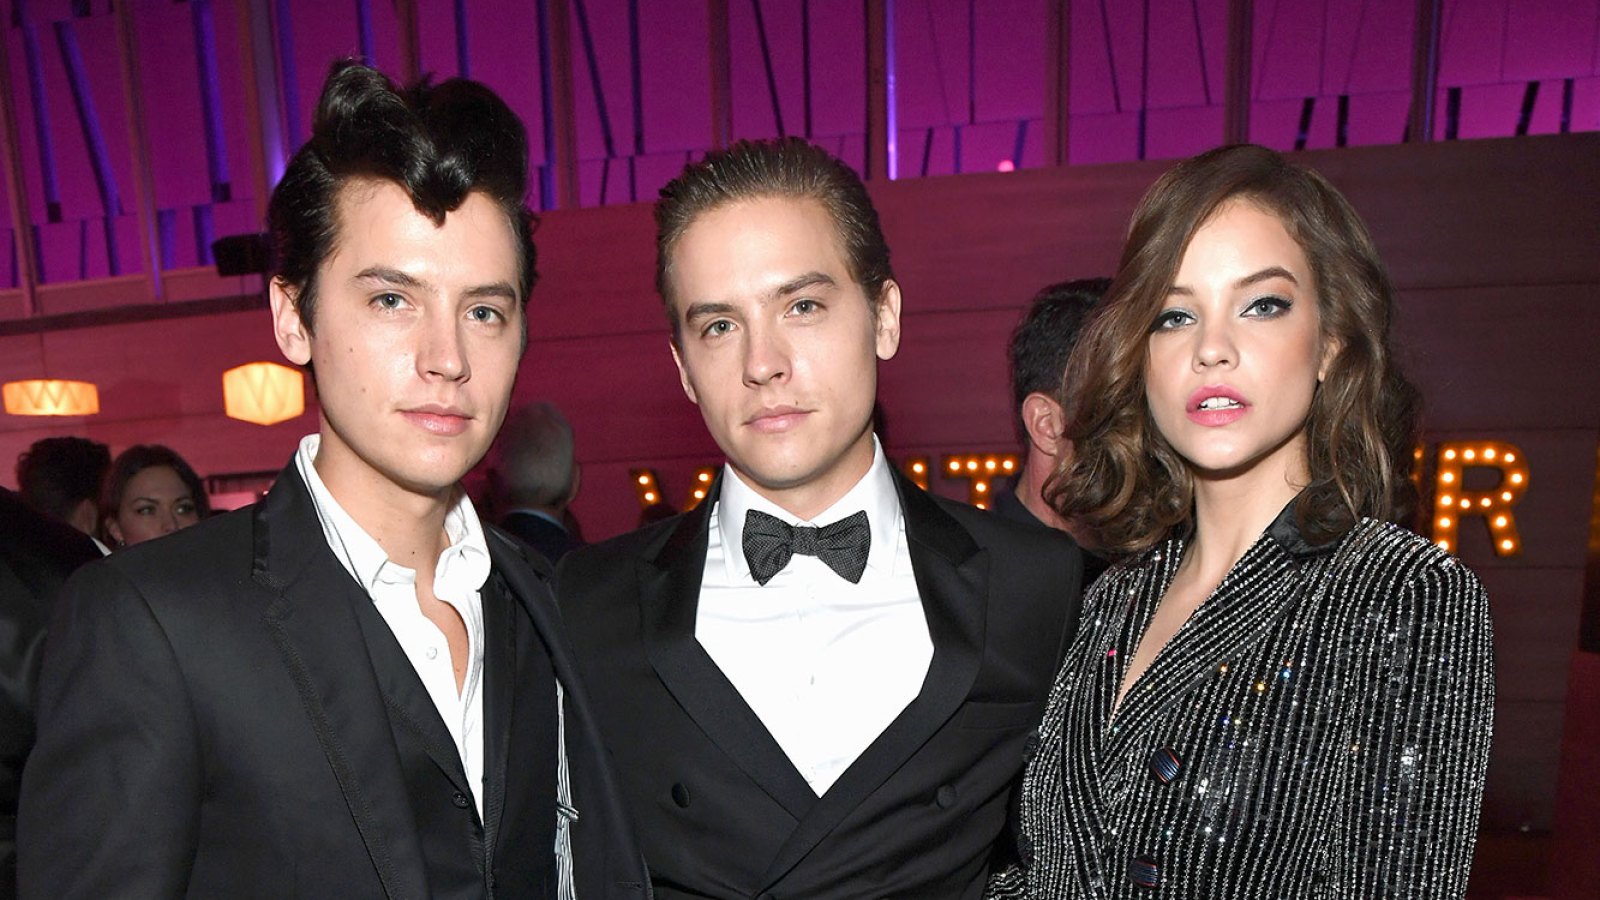 Barbara Palvin Finally Met Cole Sprouse This Weekend